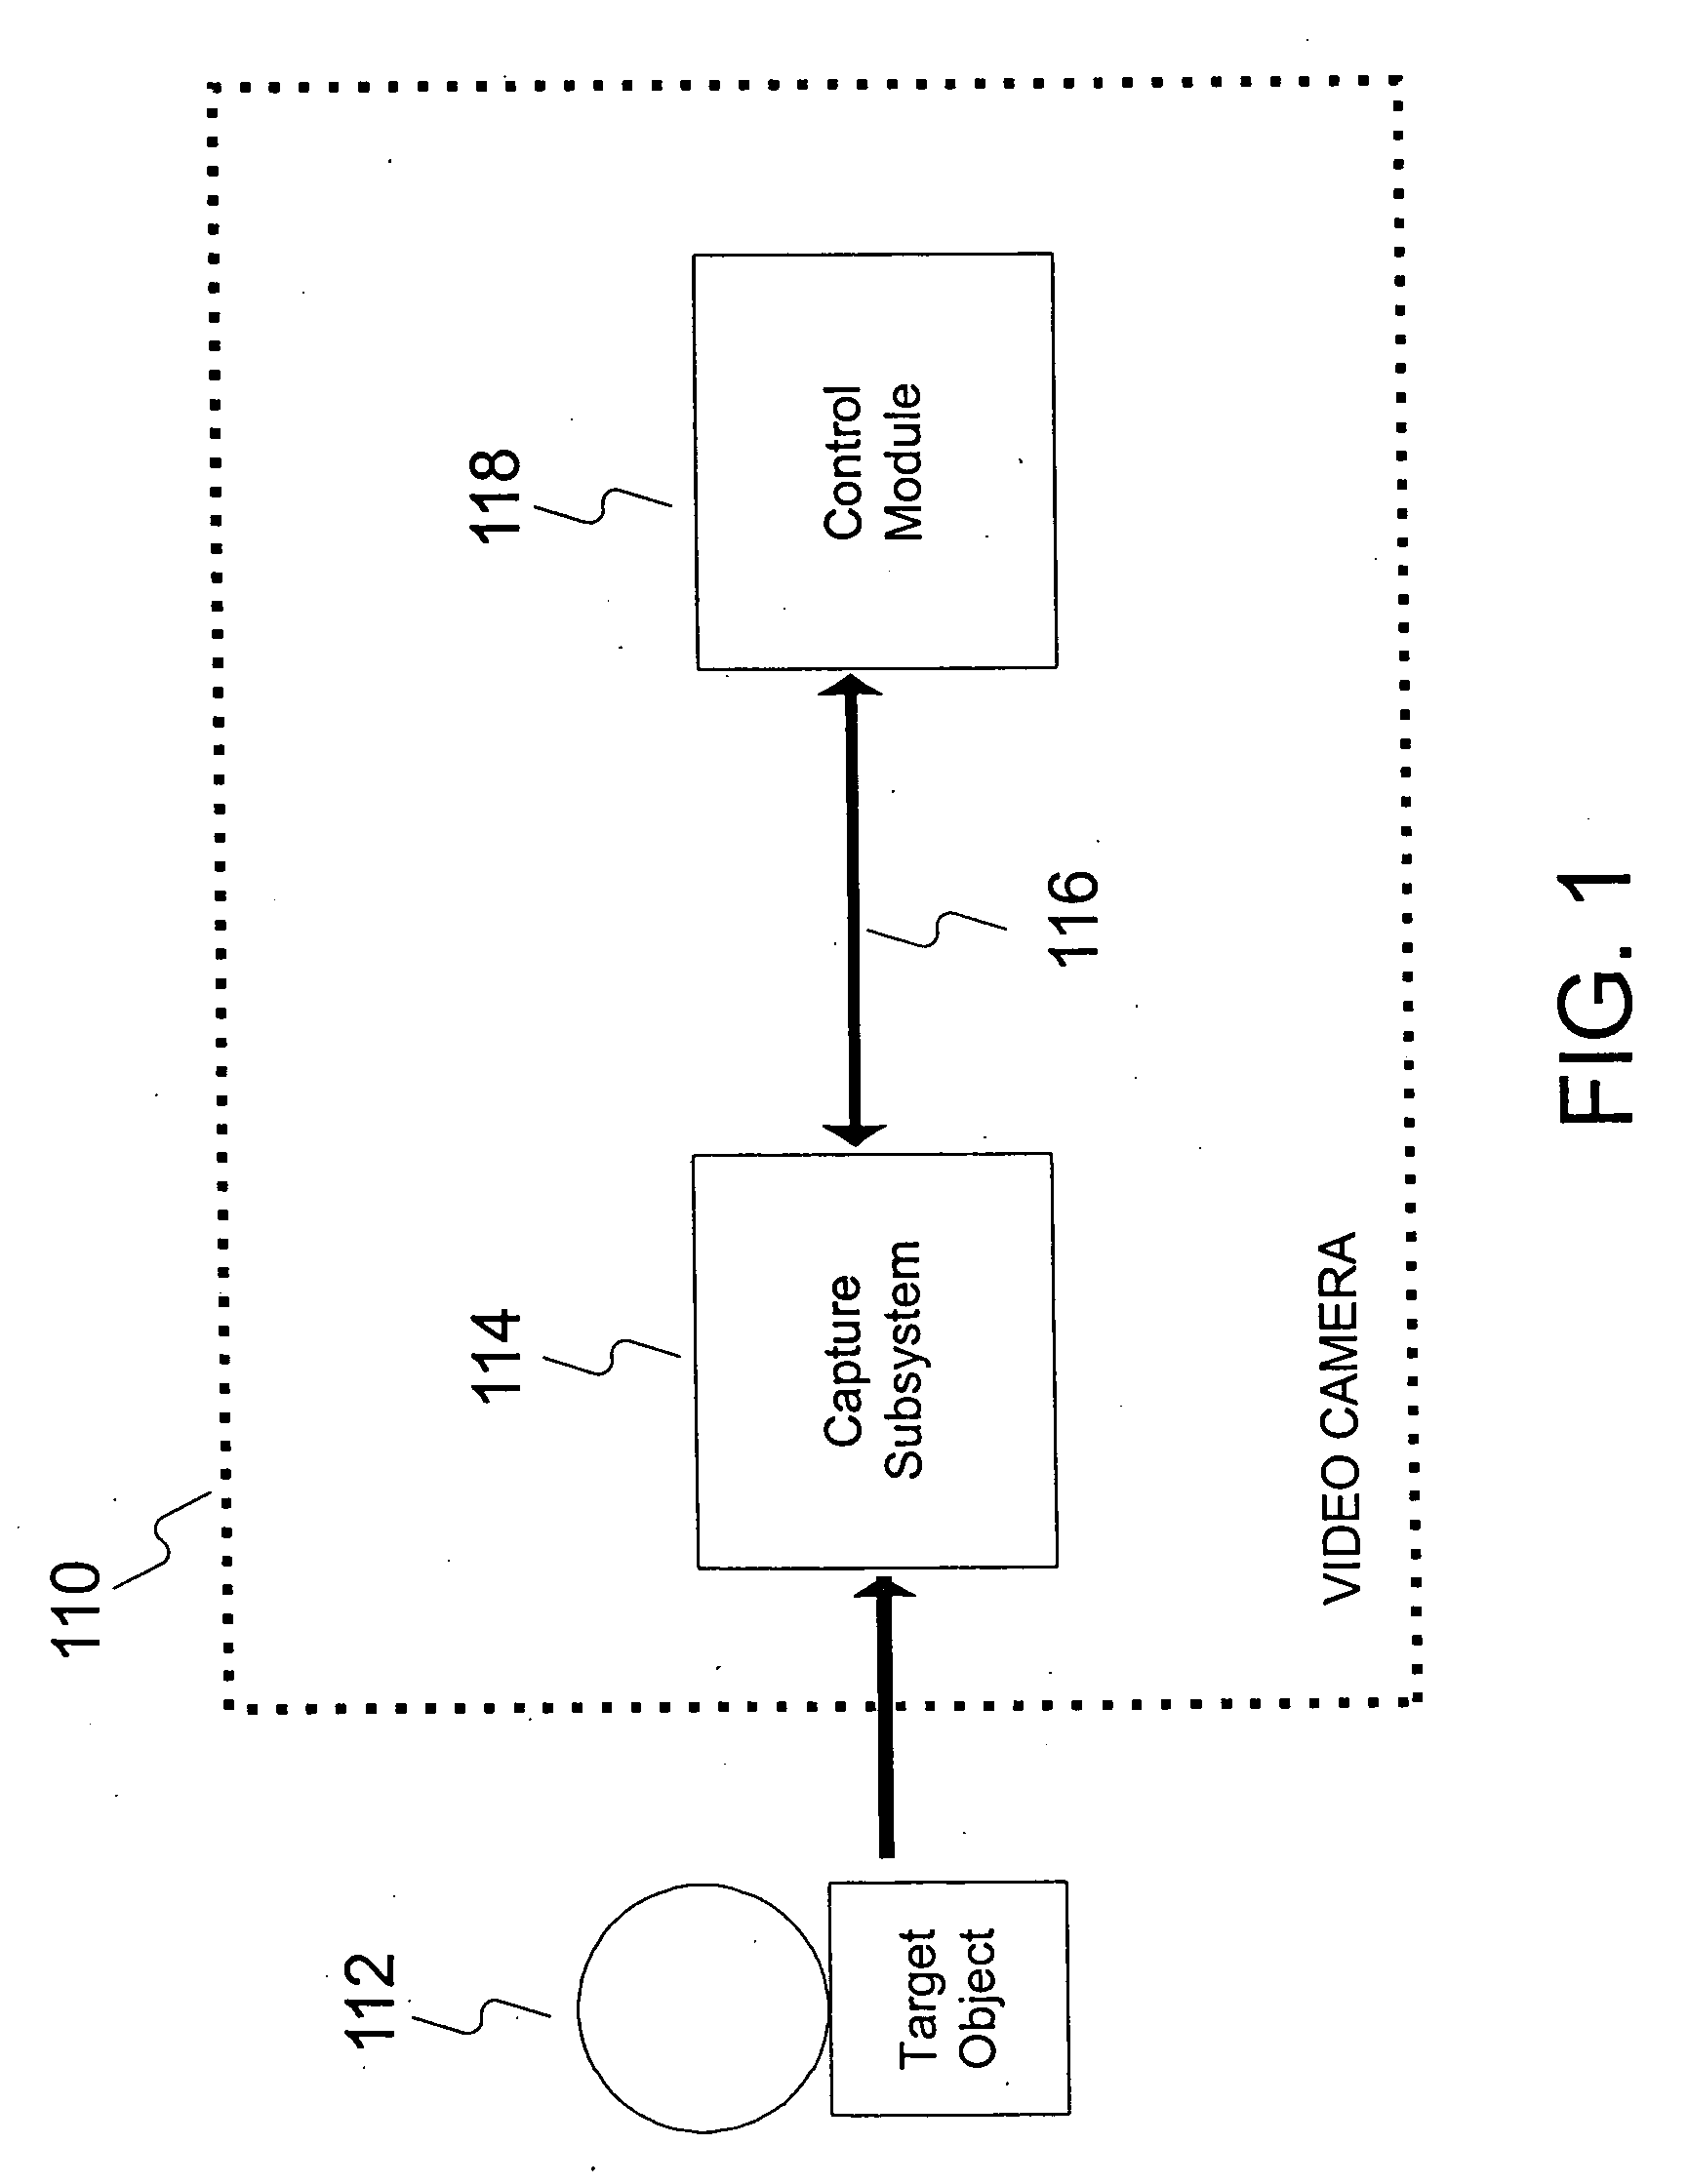 System and method for creating composite images by utilizing an imaging device